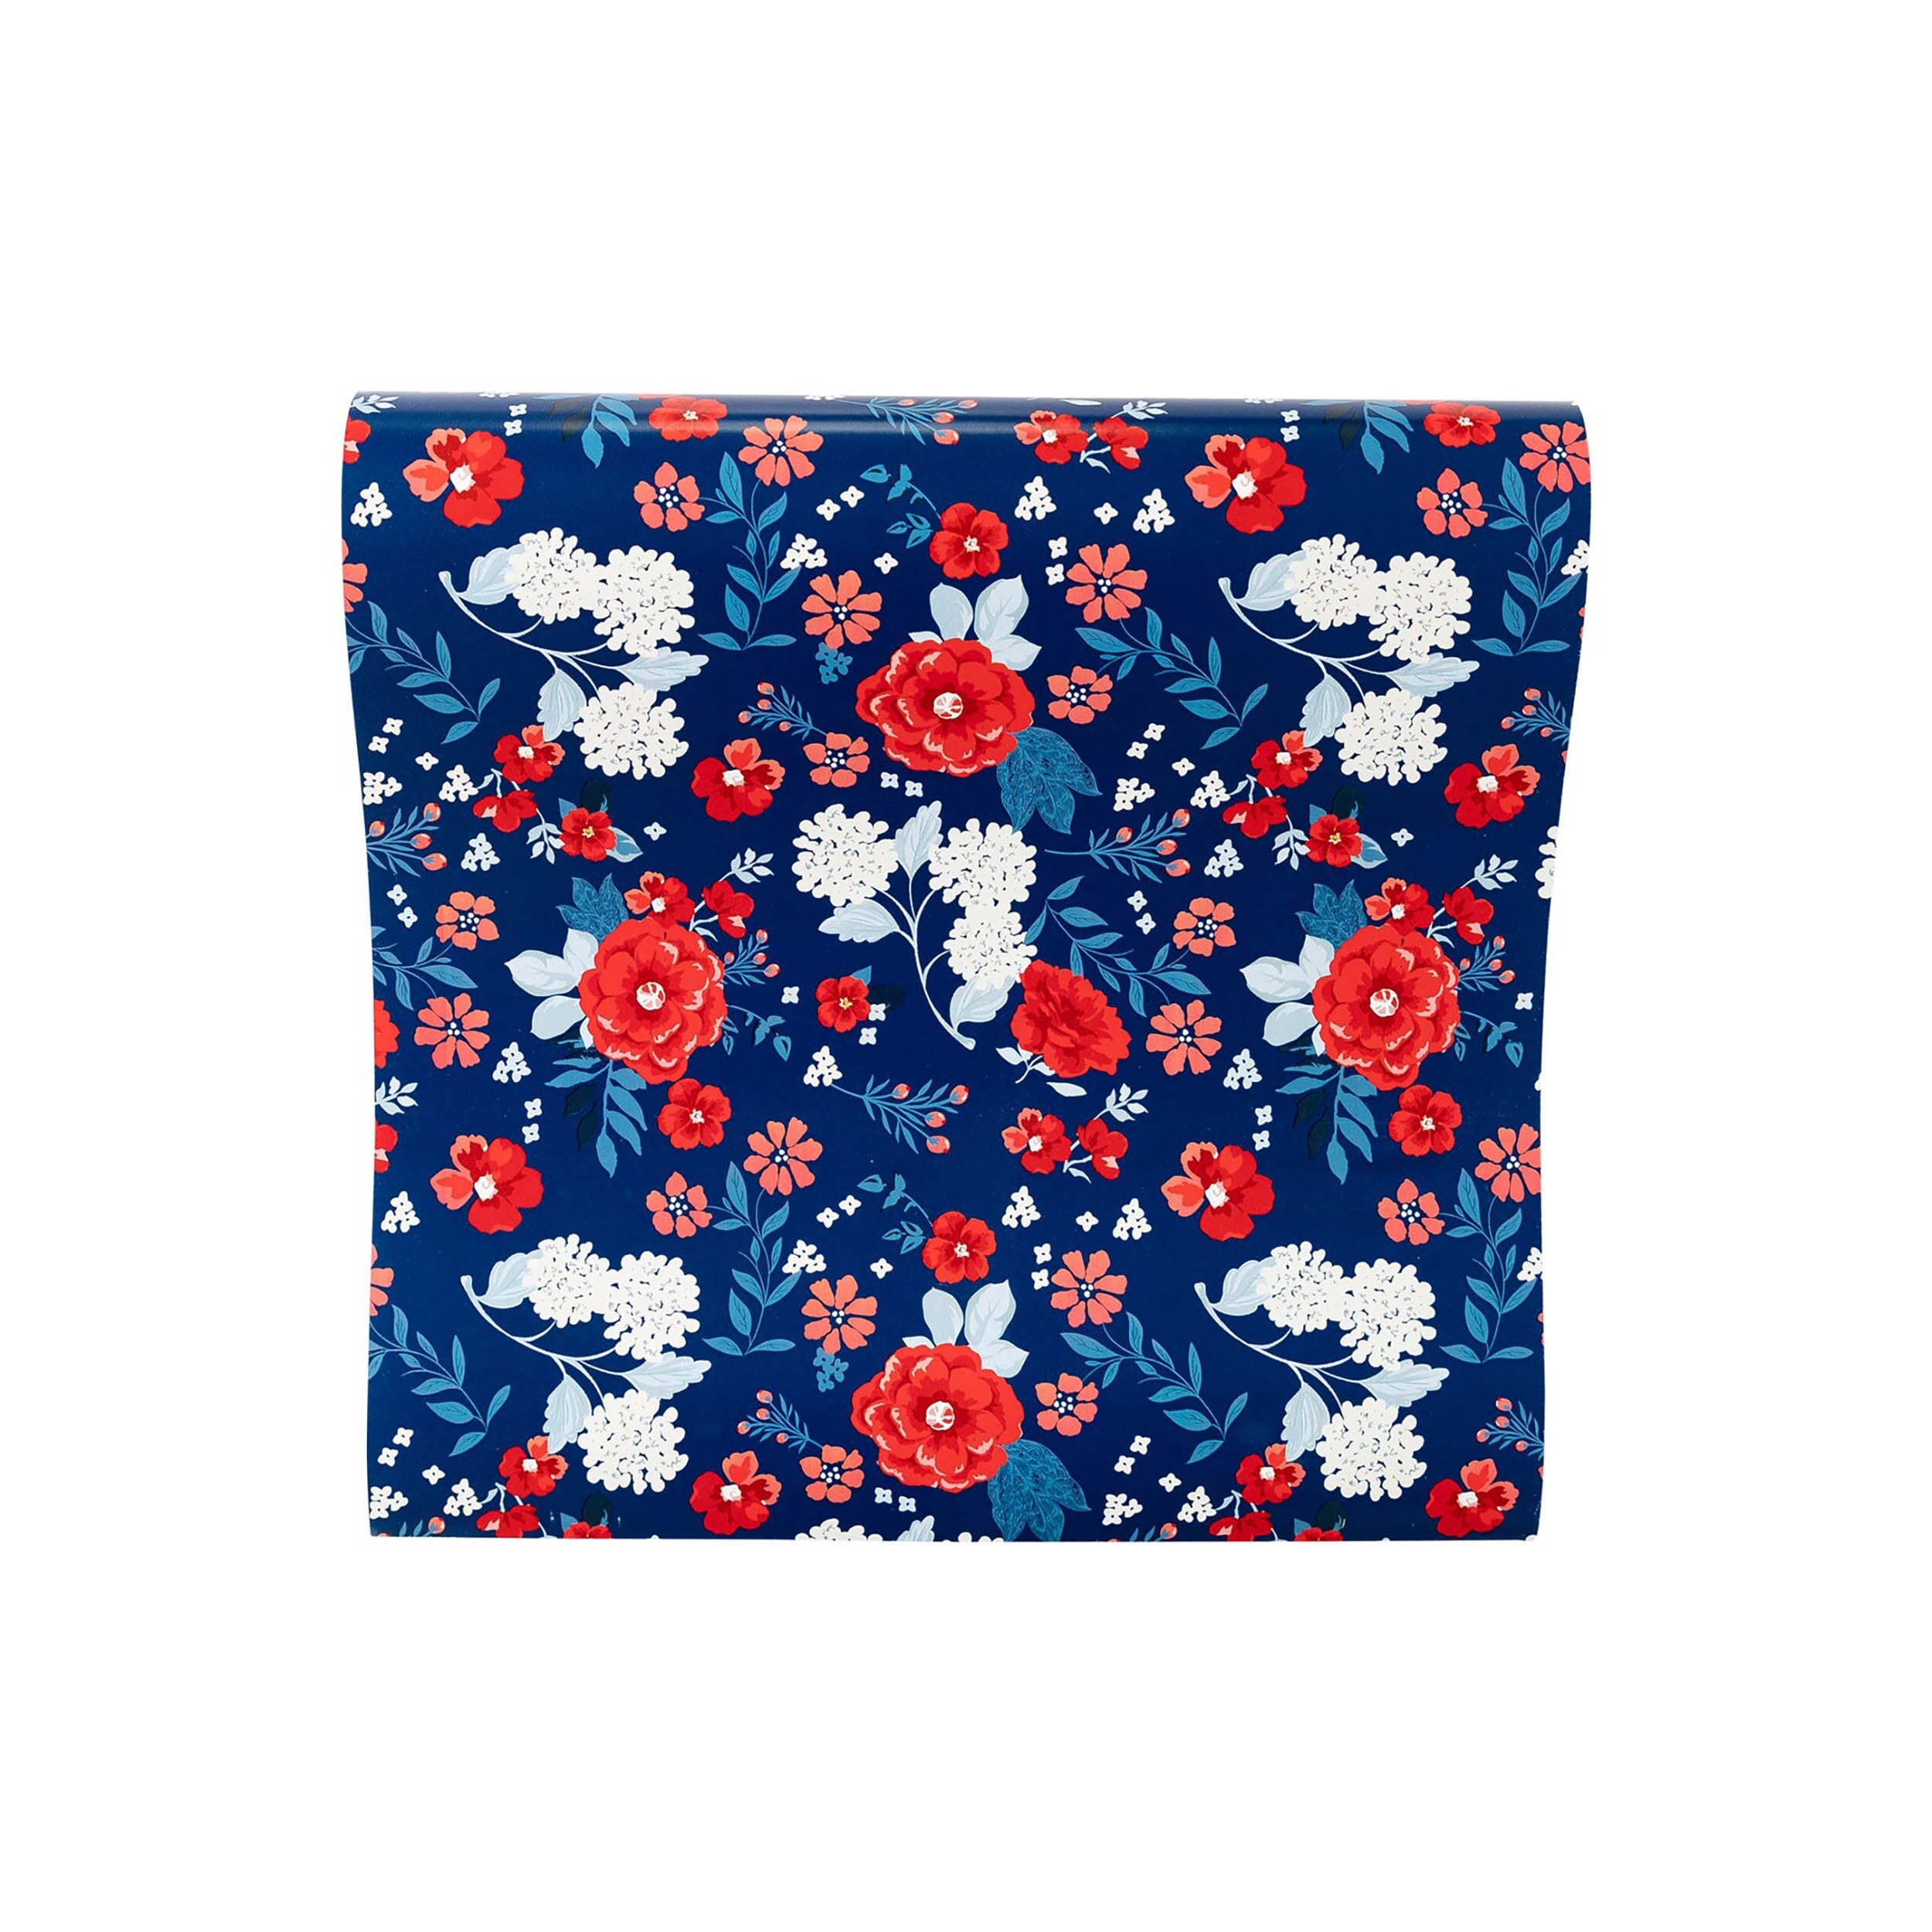 Floral Table Runner | 4th of July Table Runner - Navy Blue Table Runner - 4th of July Party Decor - Party Table Runner - Floral Theme Party